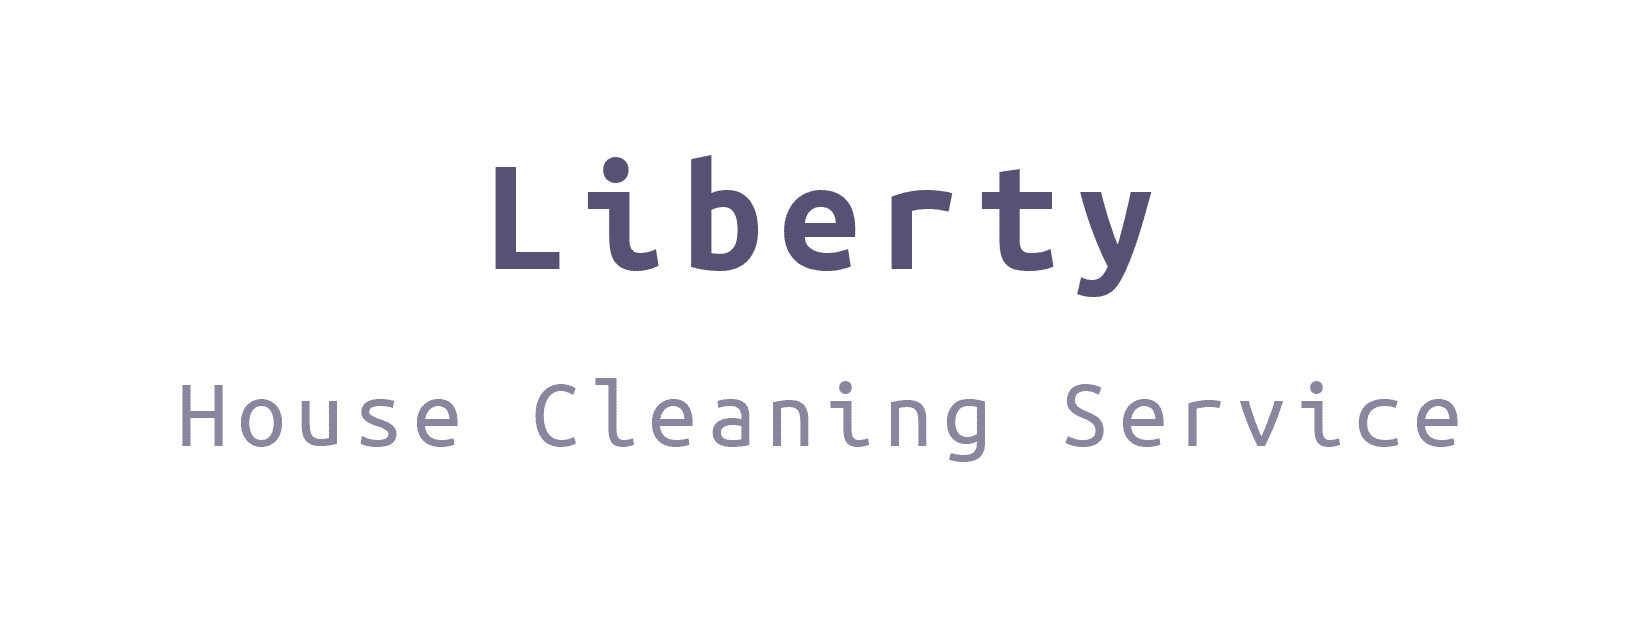 Liberty House Cleaning Service